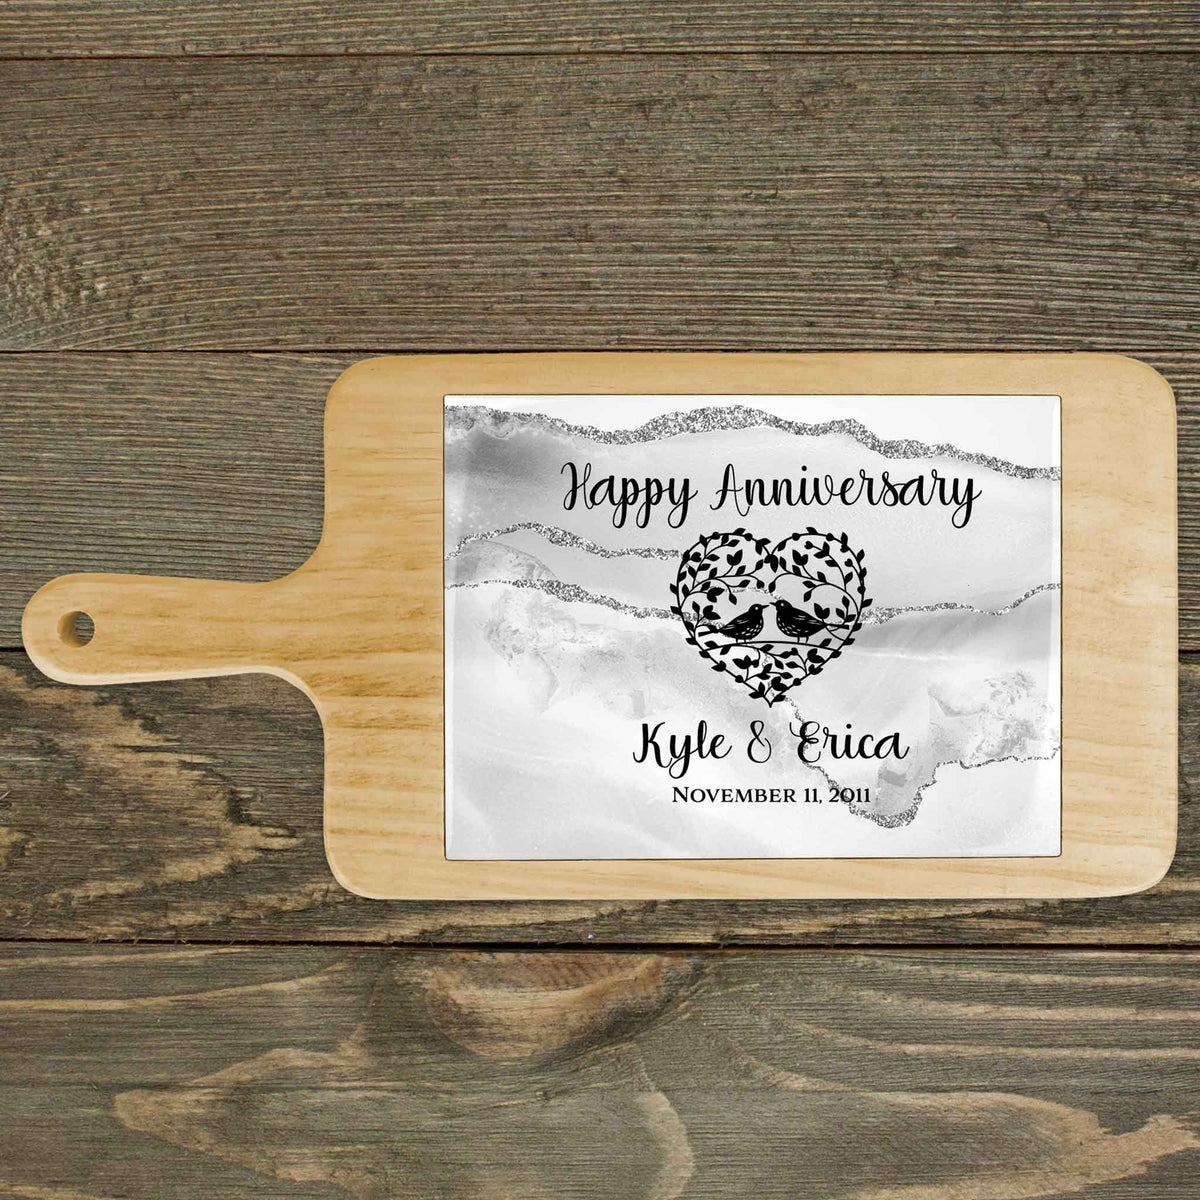 Personalized Wood Cheeseboard | Custom Wine Accessories | Happy Anniversary Silver Agate